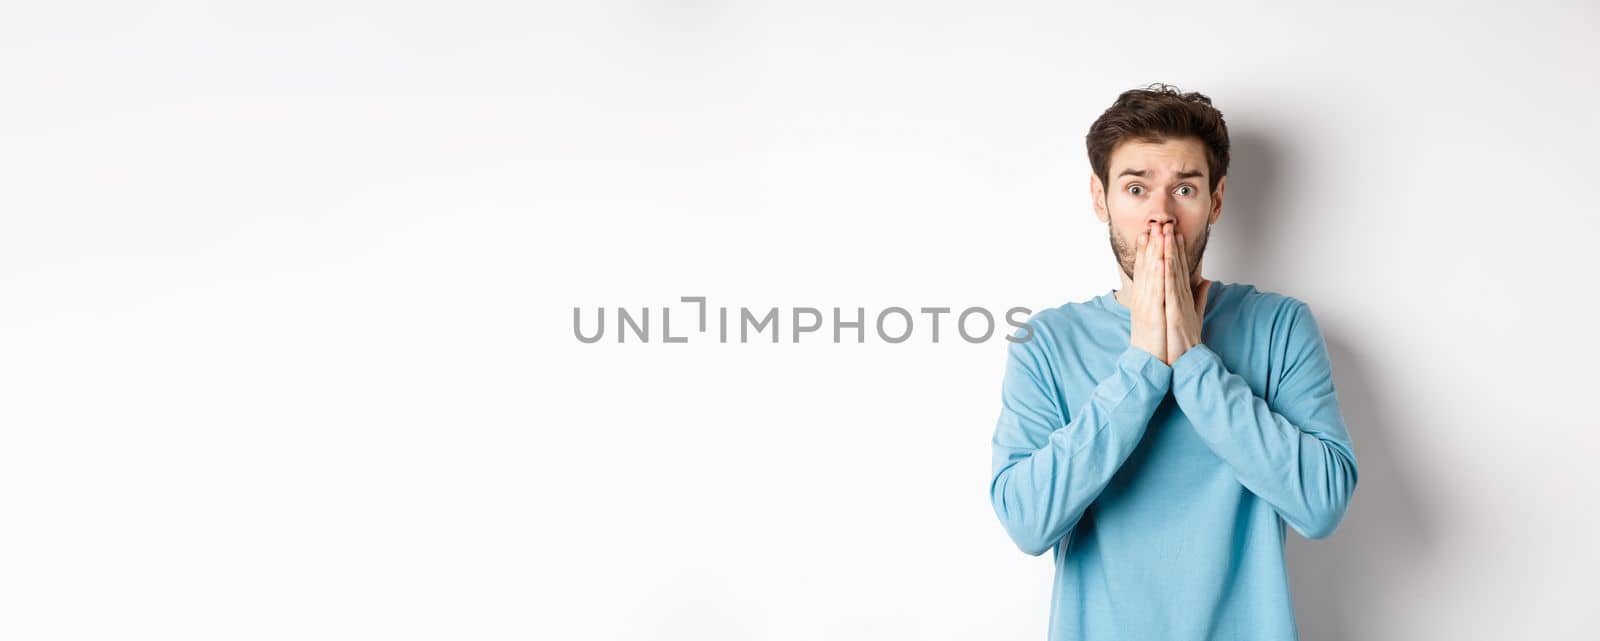 Shocked and worried young man gasping and covering mouth, look with panic at camera, standing anxious against white background.